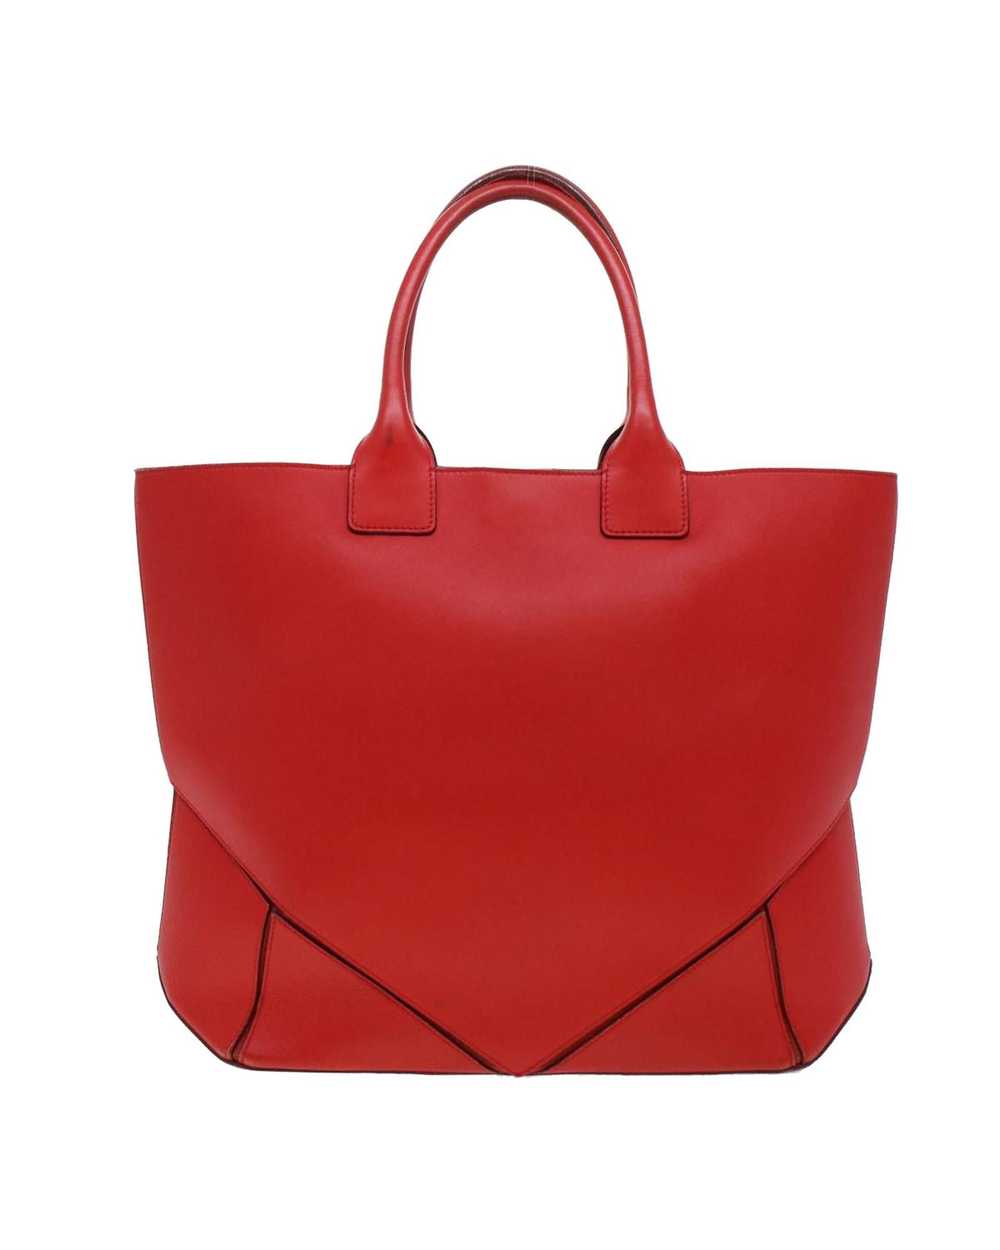 Givenchy Practical and Elegant Givenchy Red Leath… - image 3